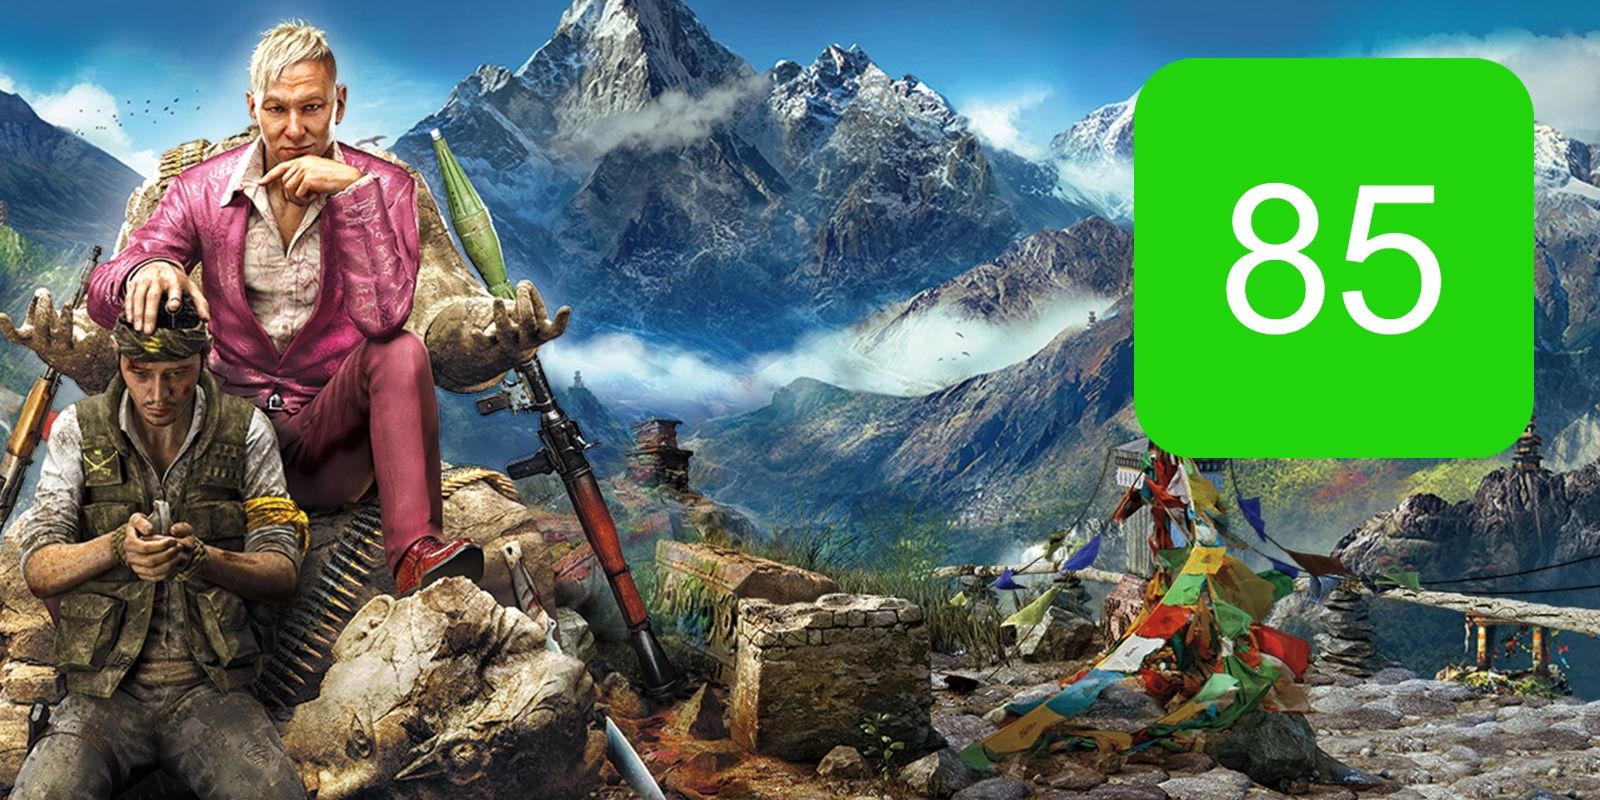 Far Cry 4 Metascore for PC, featuring Pagan Min